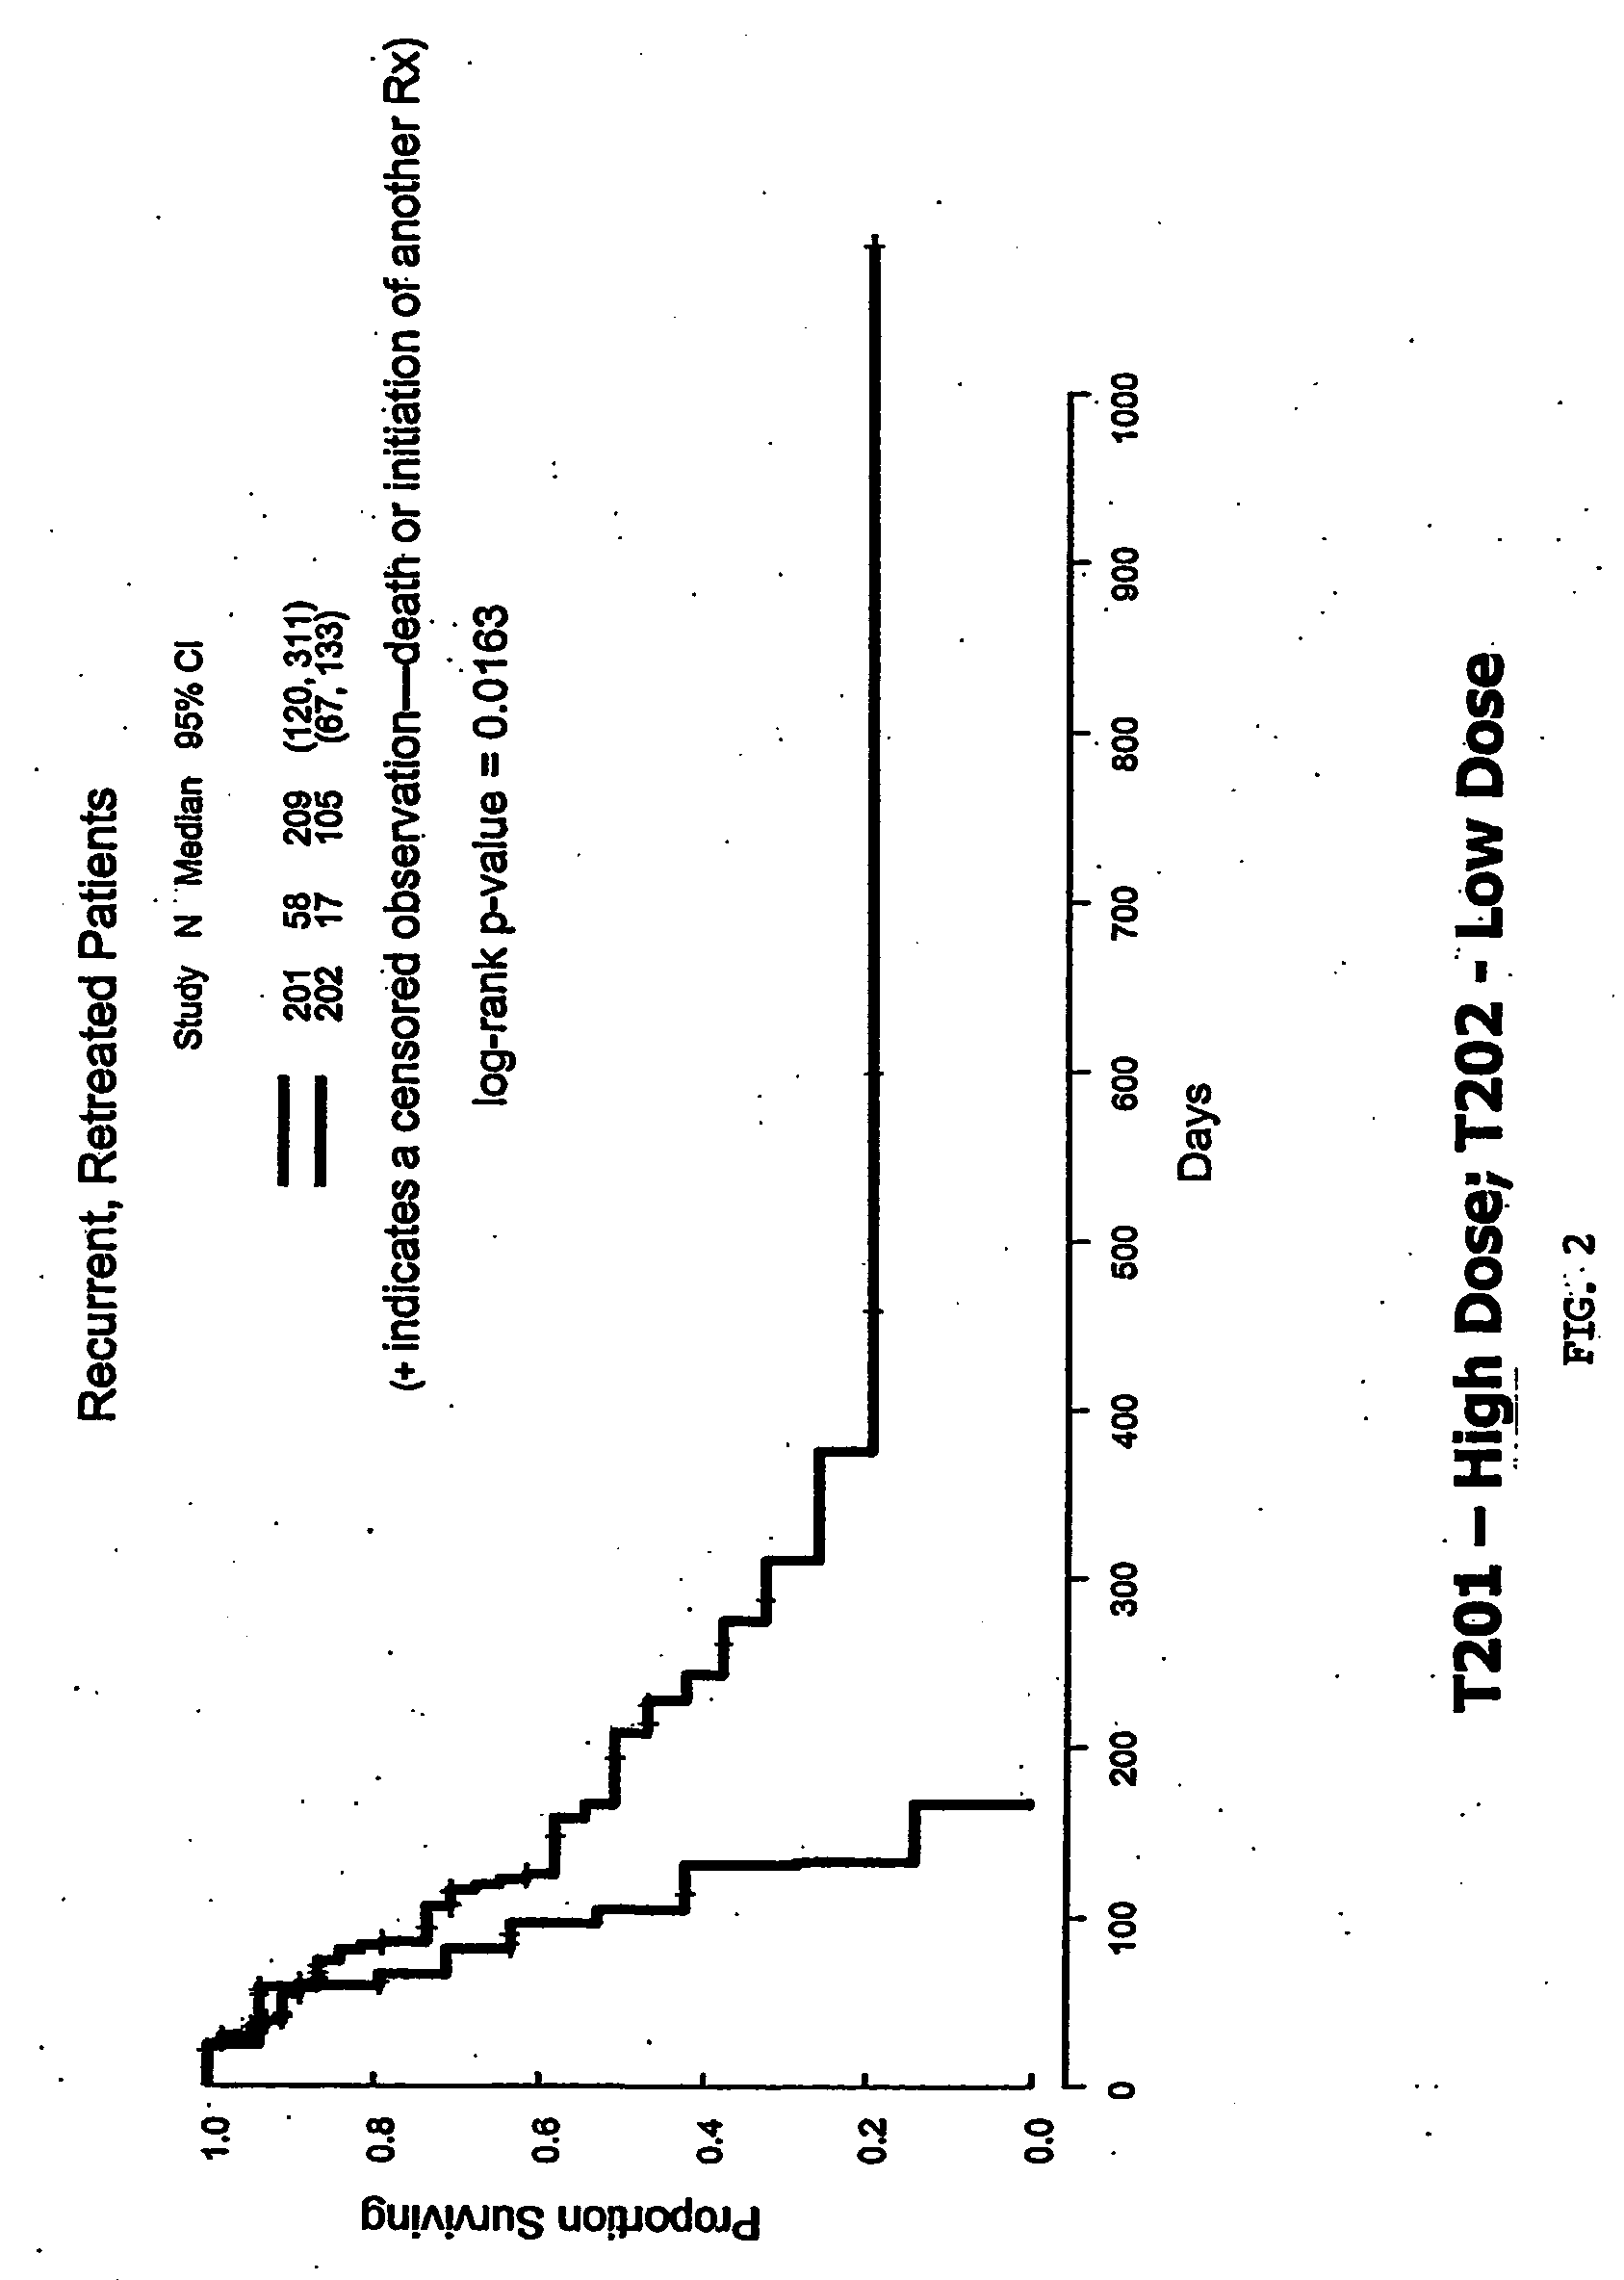 Combination of Ad-P53 and Chemotherapy for the Treatment of Tumours